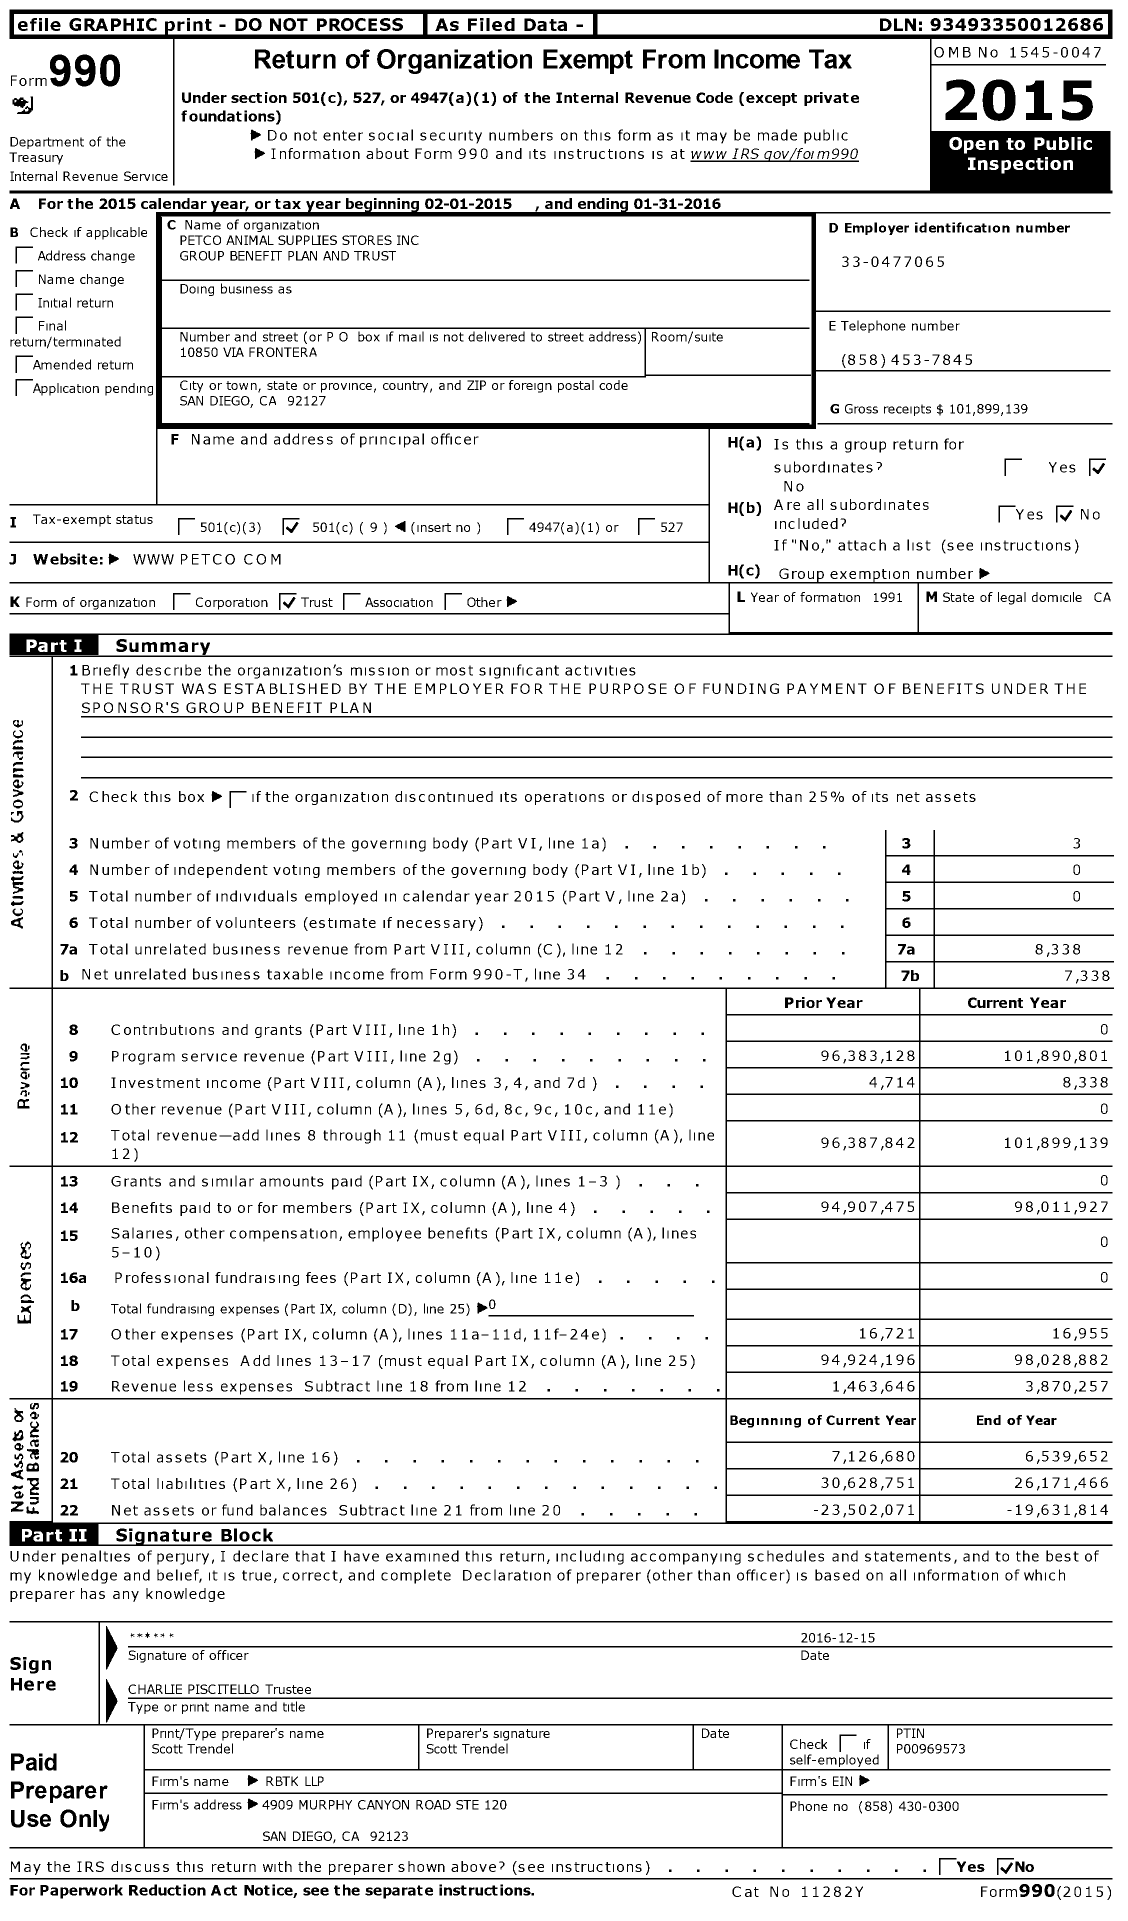 Image of first page of 2015 Form 990O for Petco Animal Supplies Stores Group Benefit Plan and Trust